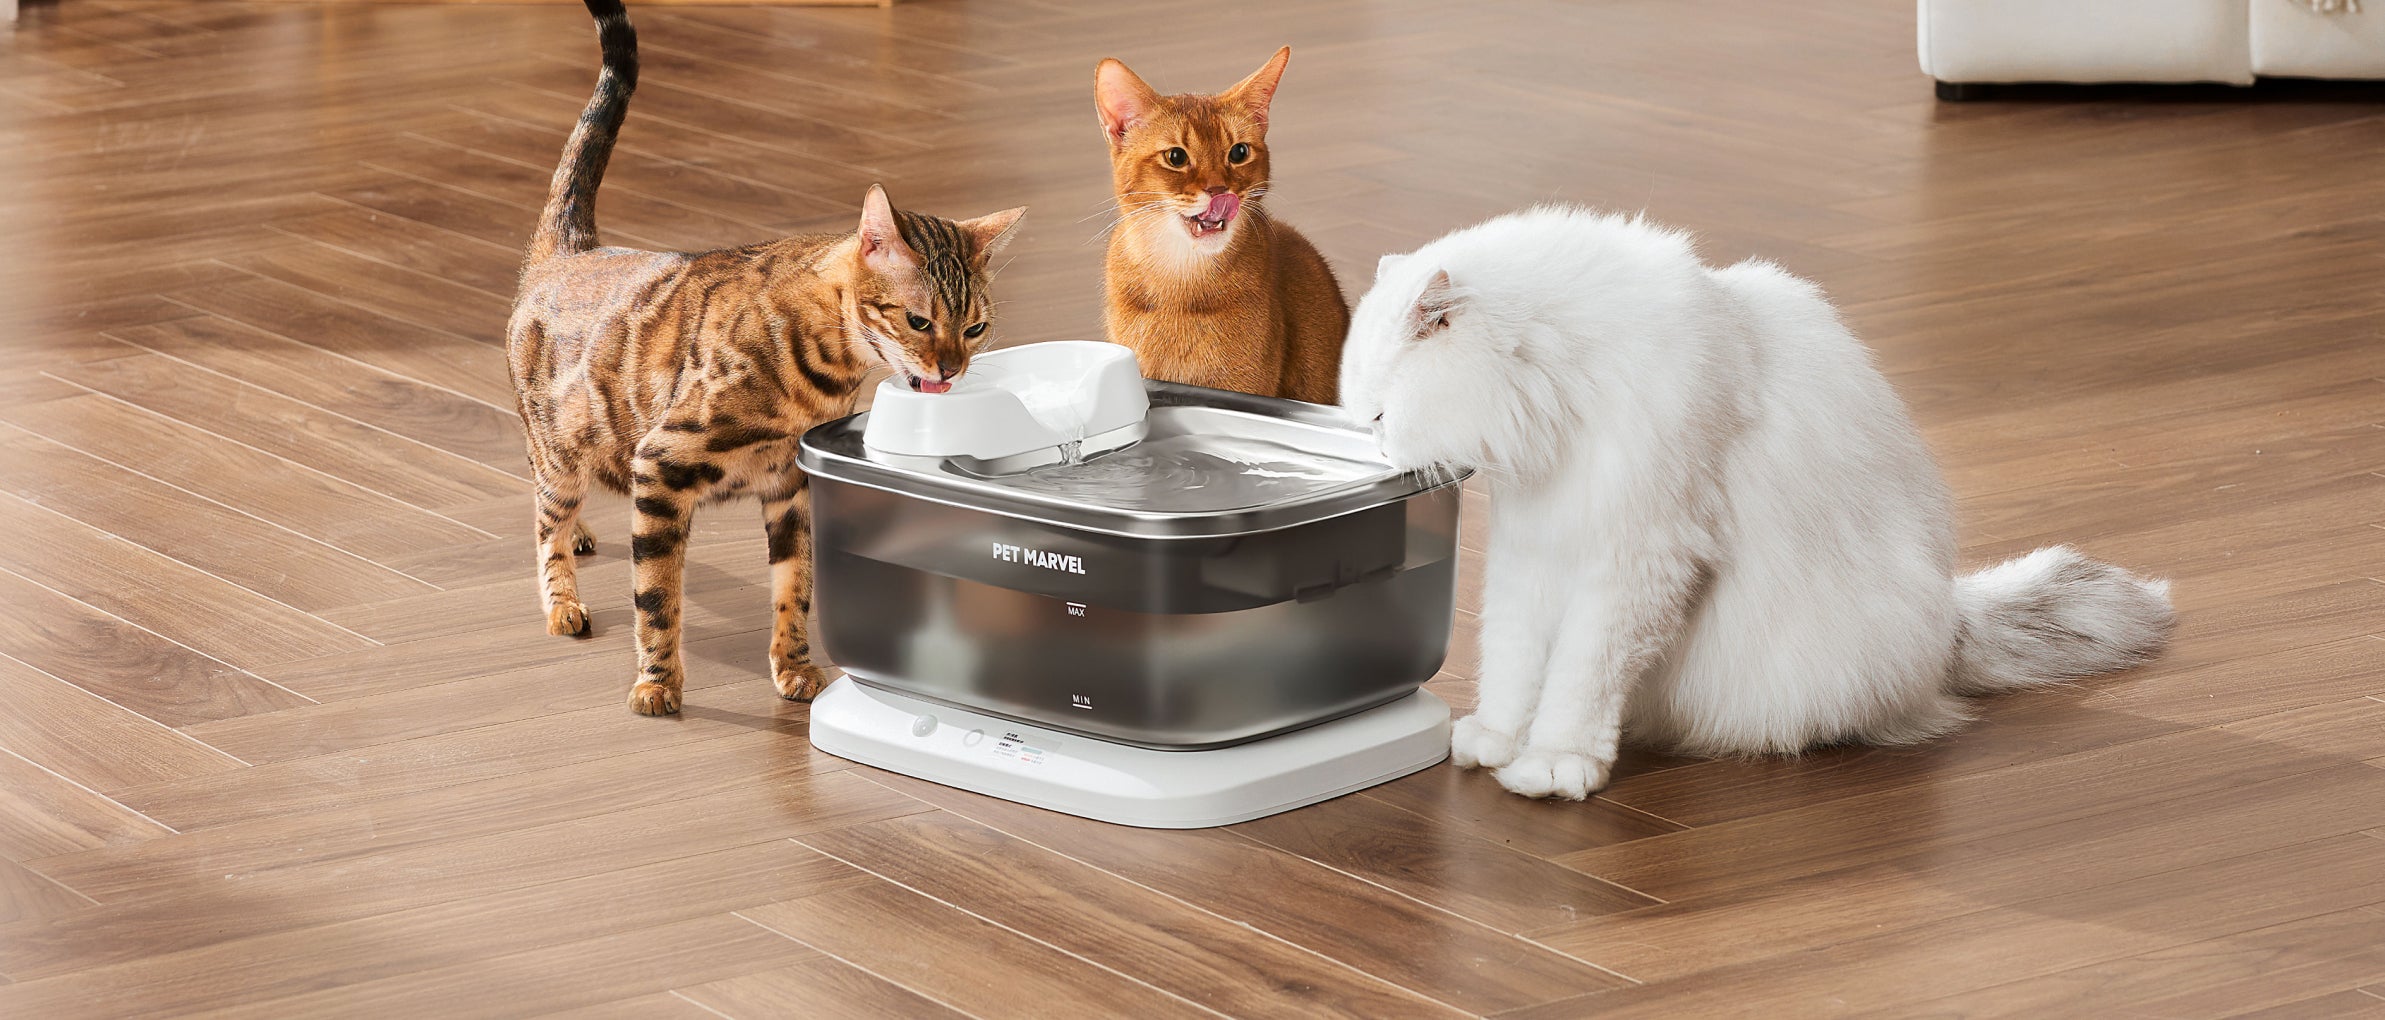 PET MARVEL: Automatic Litter Box, Feeder, Water Fountain for Cat